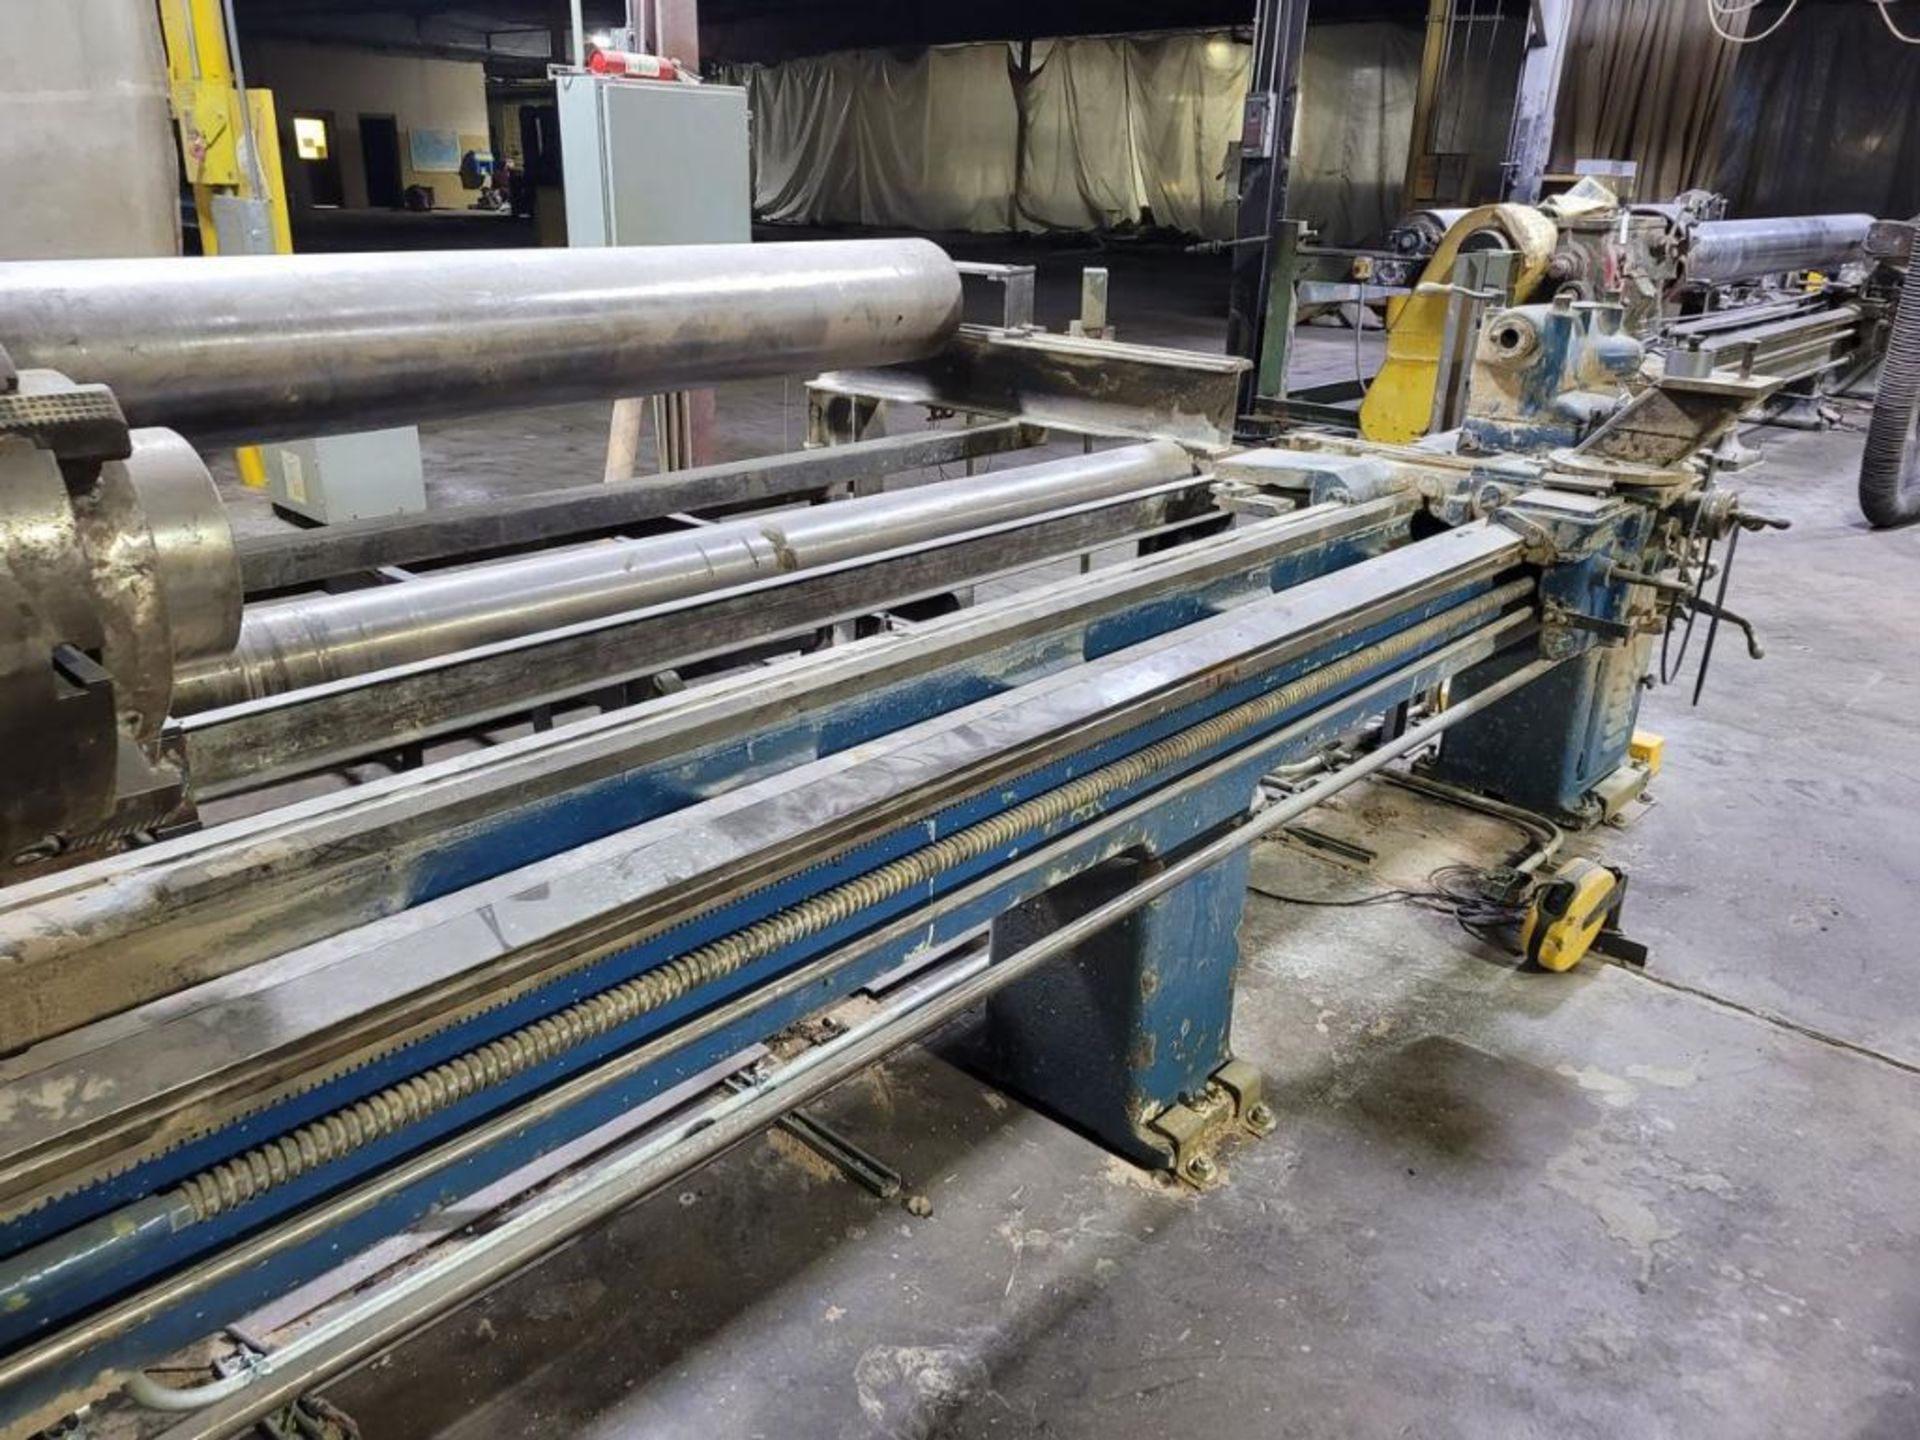 LeBlond Converted Rubber Belt Grinding Lathe: 15-1010 Spindle RPM, Approx. 16" Swing, Approx. 120" B - Image 4 of 6